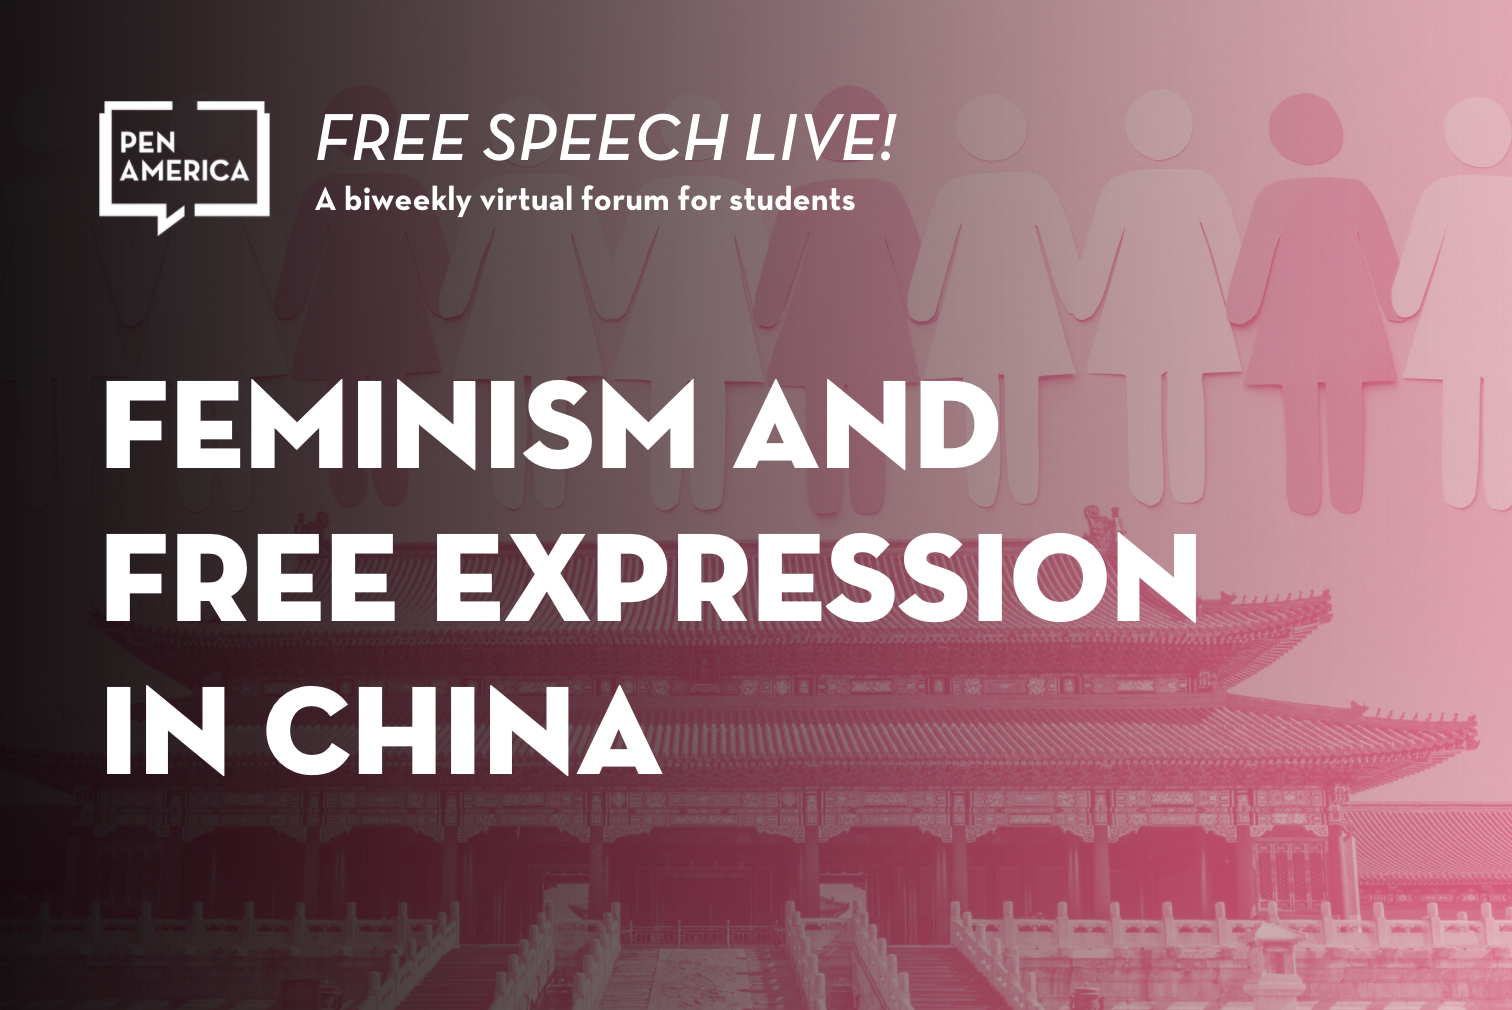 Forbidden City and paper cutouts of women holding hands with pink overlay; on top: “Free Speech Live! A biweekly virtual forum for students. Feminism and Free Expression in China”